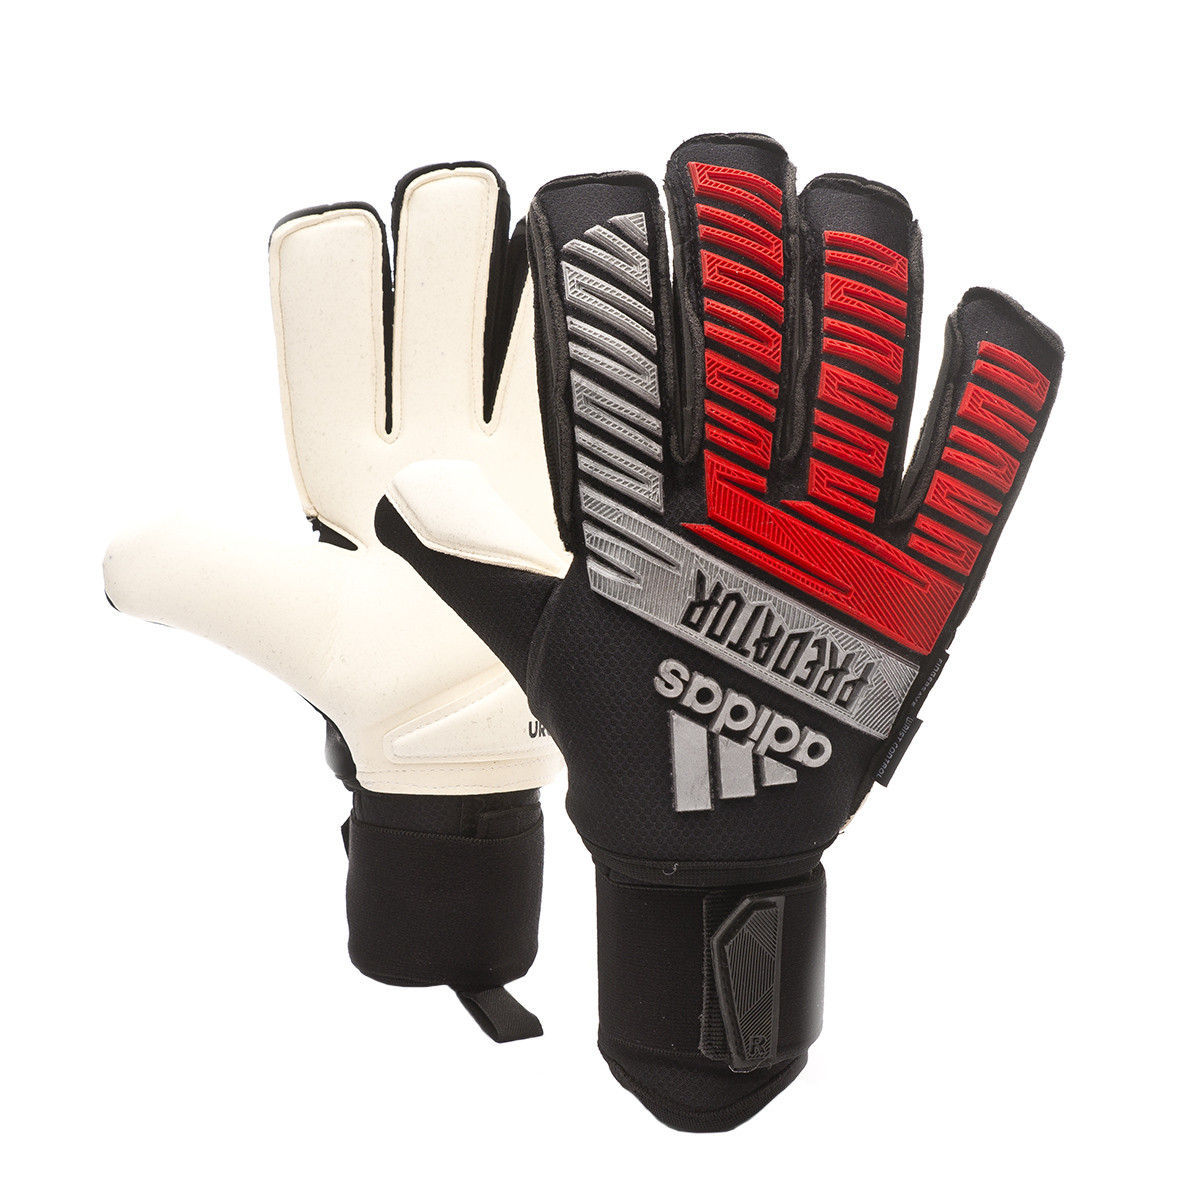 adidas ultimate gloves